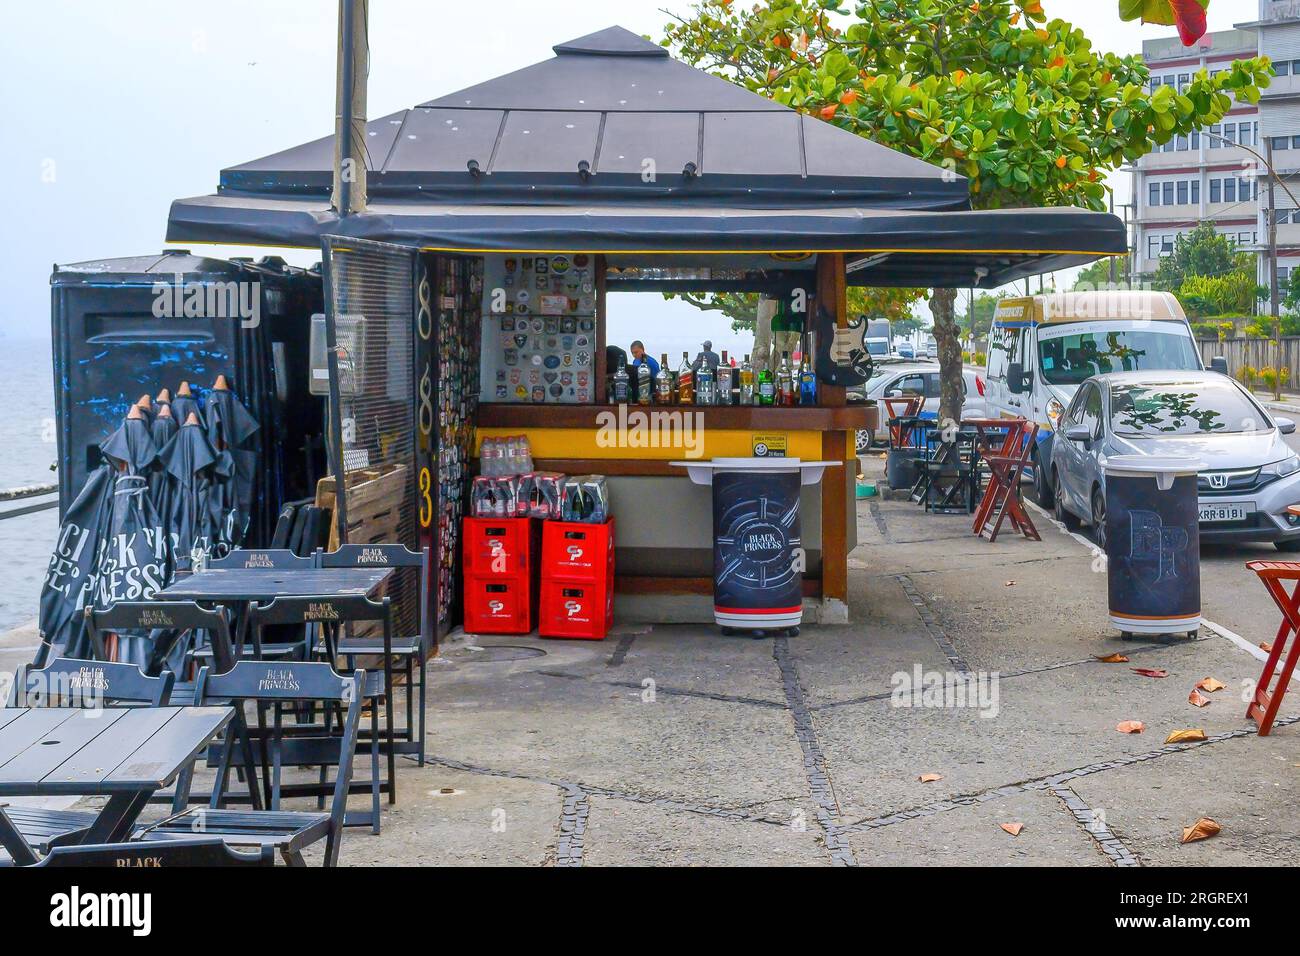 Niteroi, Brazil, small business kiosk in the waterfront district. The bar establishment sells alcohol to tourists. Stock Photo